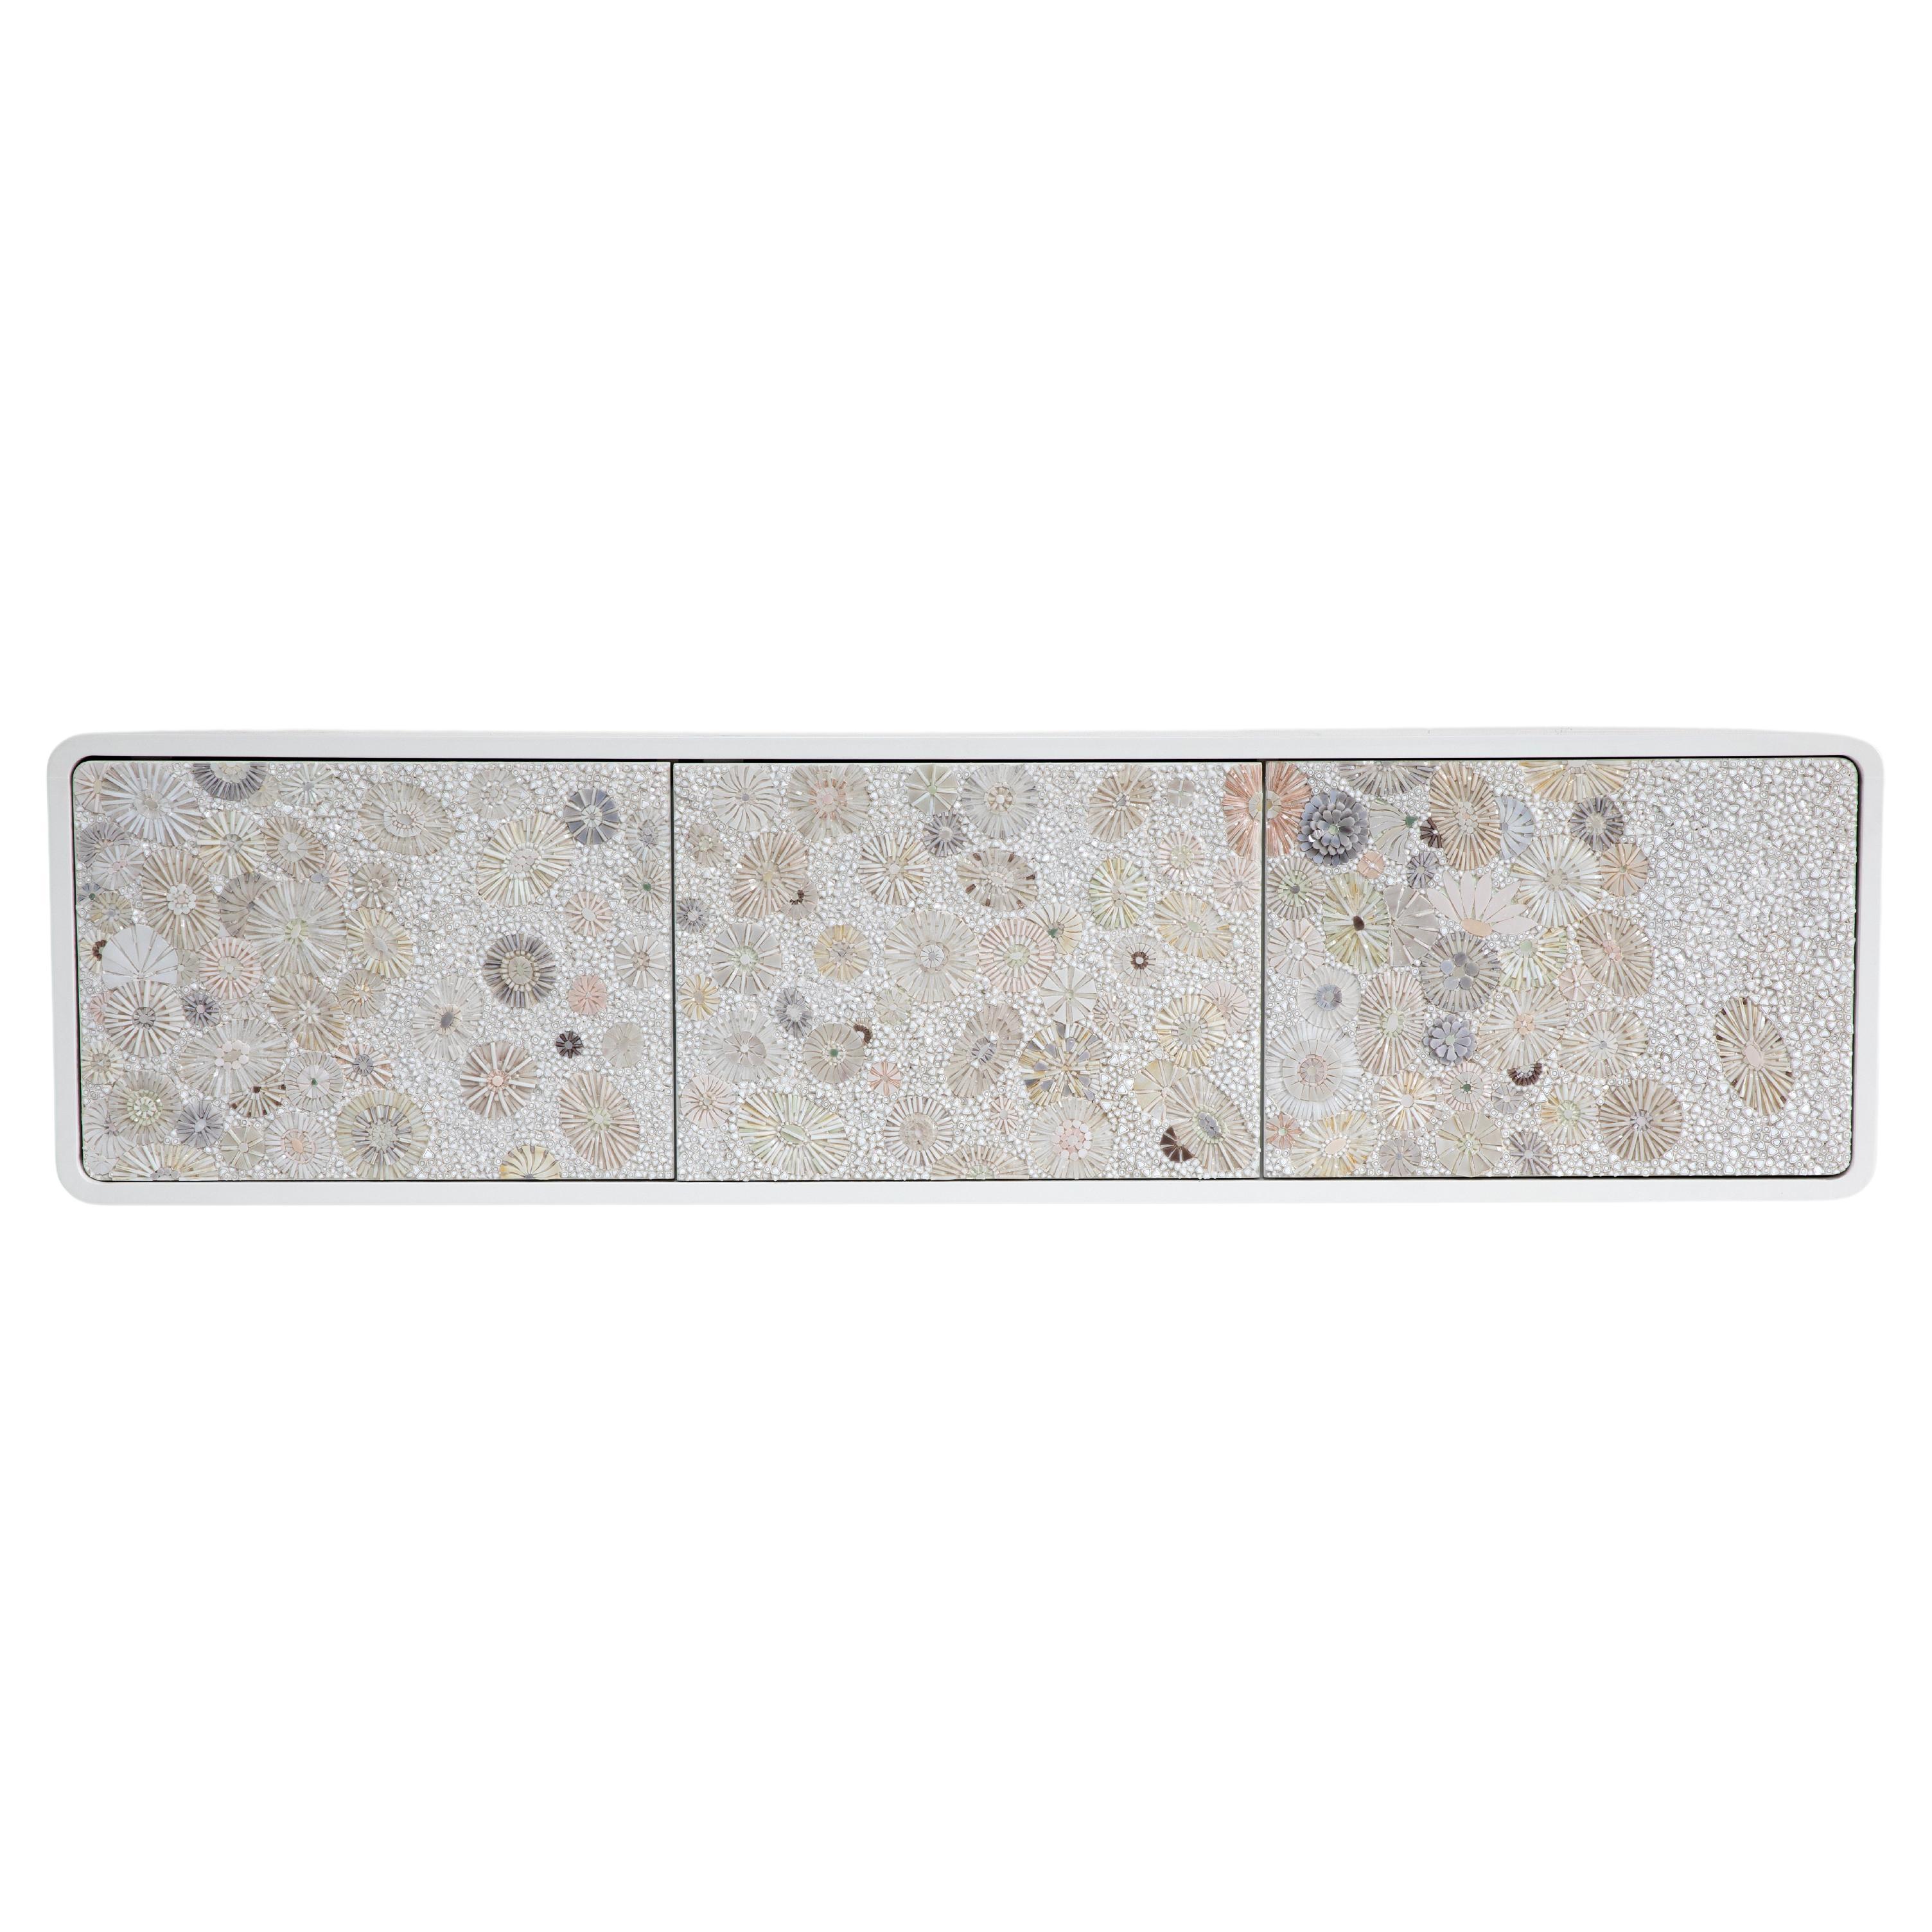 The Modern Floating Blossom 3-Door Buffet is made up of 3 touch latch doors decorated with hand-cut glass in a Blossom Mosaic in shades of Ivory, Grey, Pearl, and Lavender. 

Custom sizing and colors available. Handmade in Brooklyn, New York.